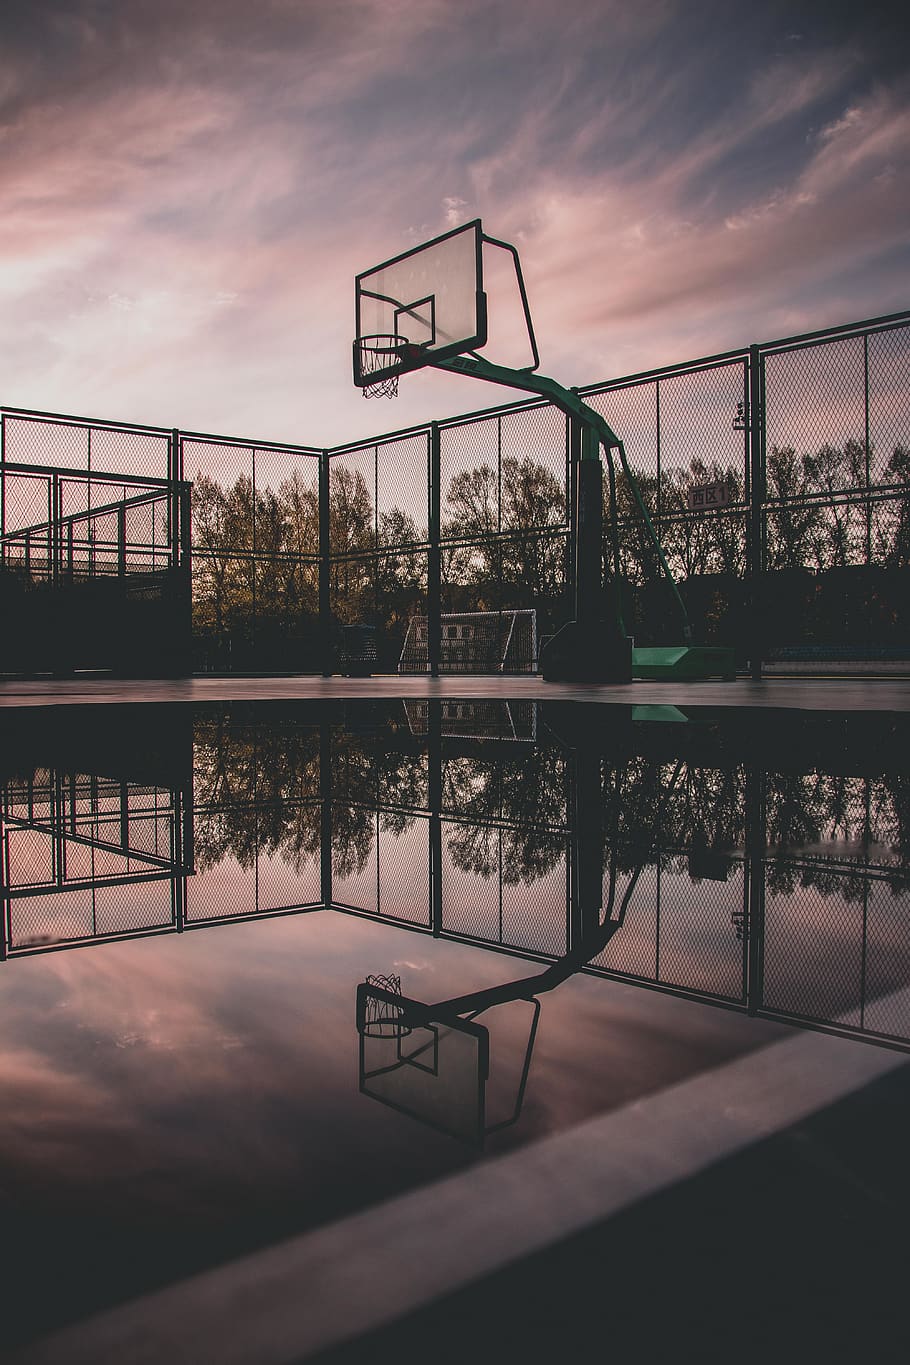 Silhouette Photo of Portable Basketball, architecture, basketball basket